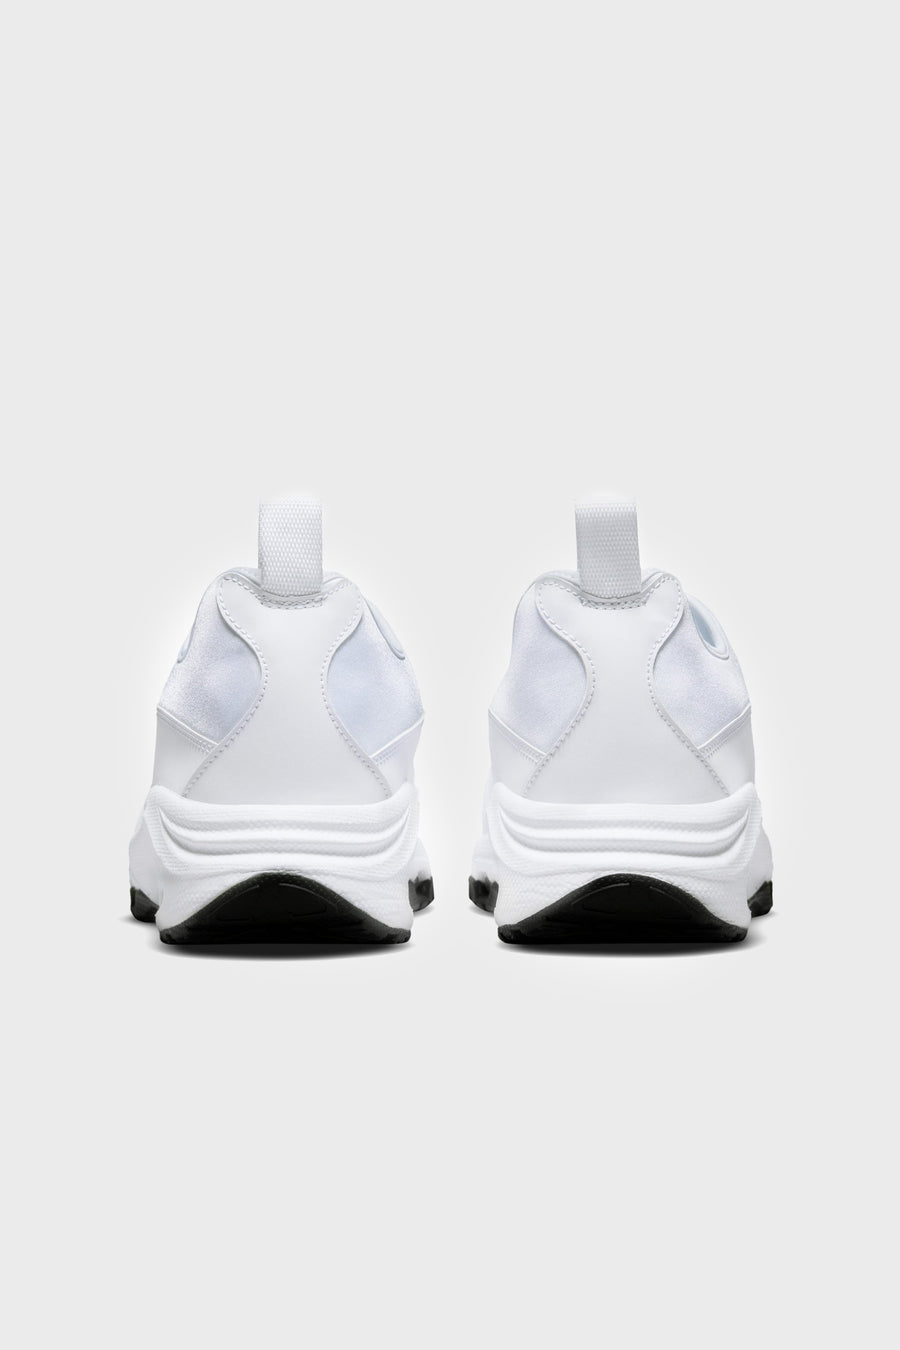 CDG Air Max Sunder SP White DO8095-102 (LAUNCH PRODUCT)